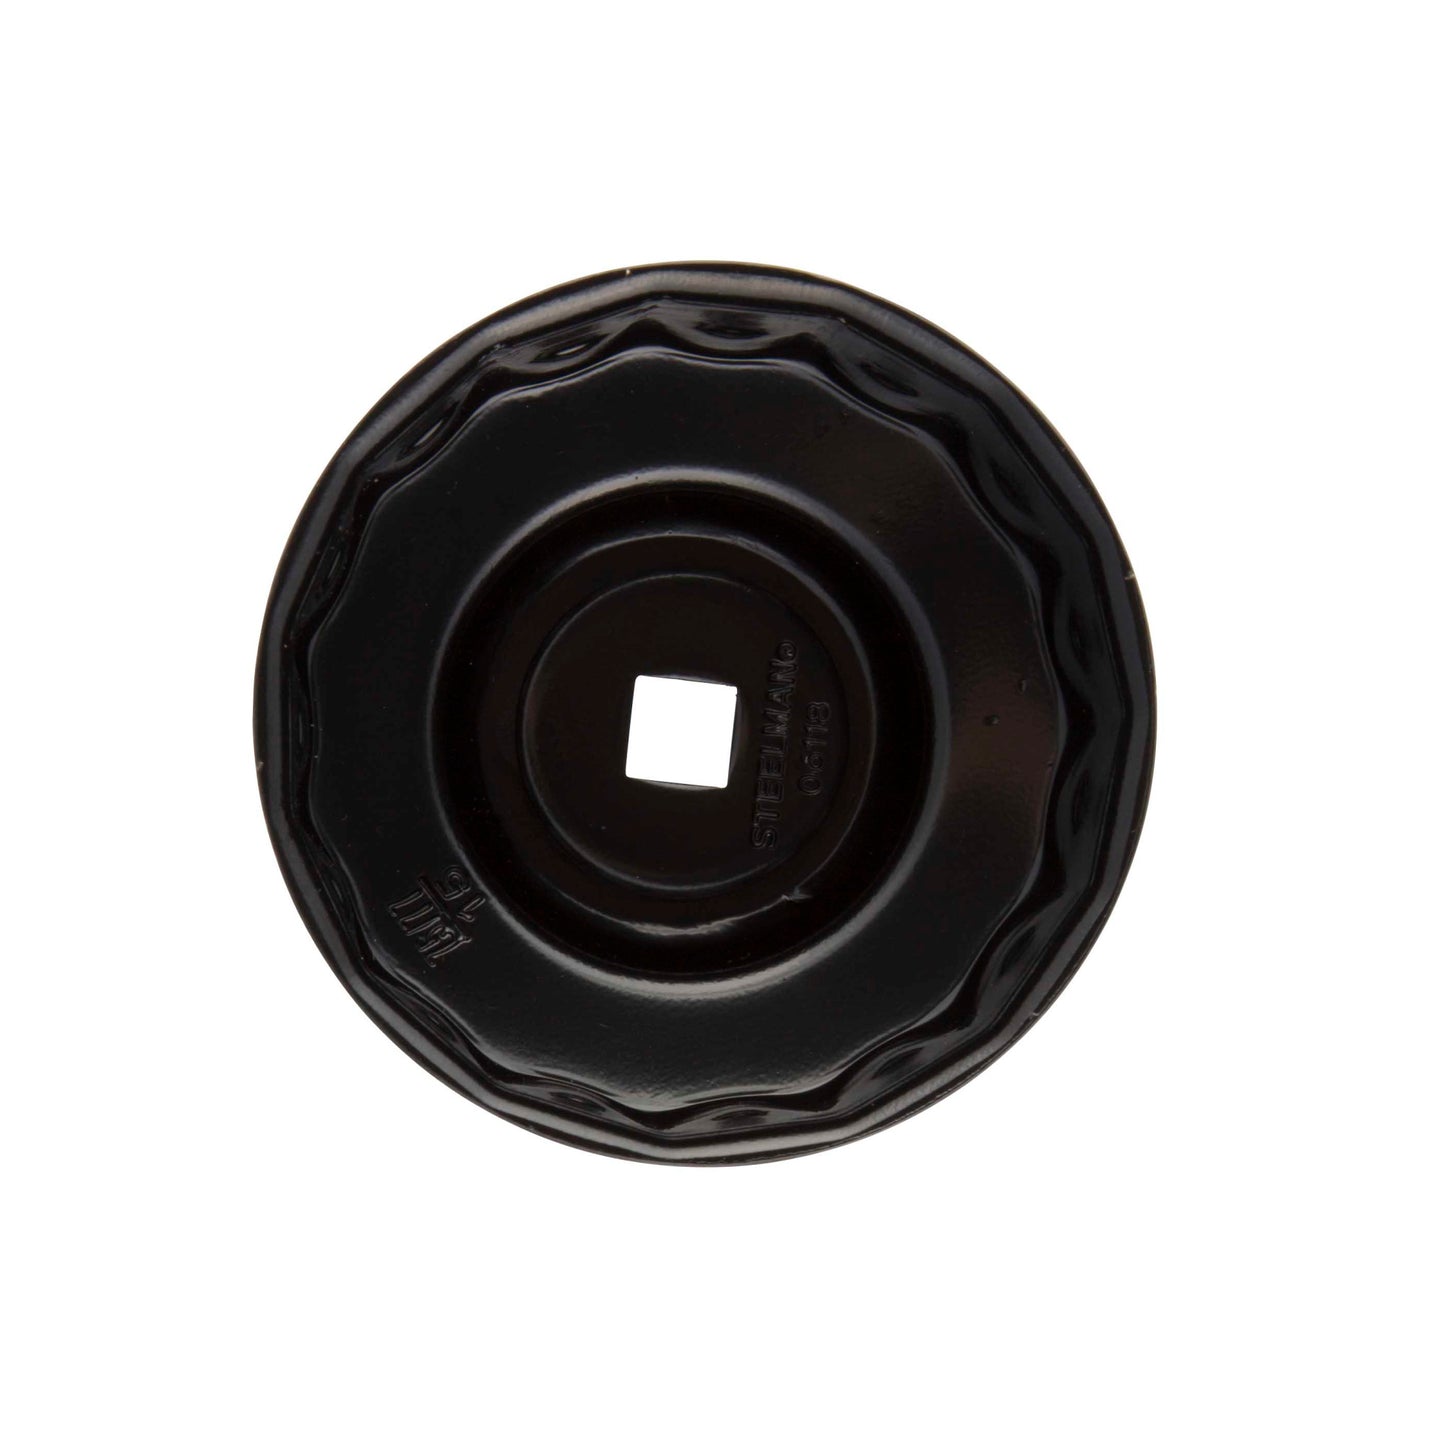 Oil Filter Cap Wrench 75mm and 77mm x 15 Flute